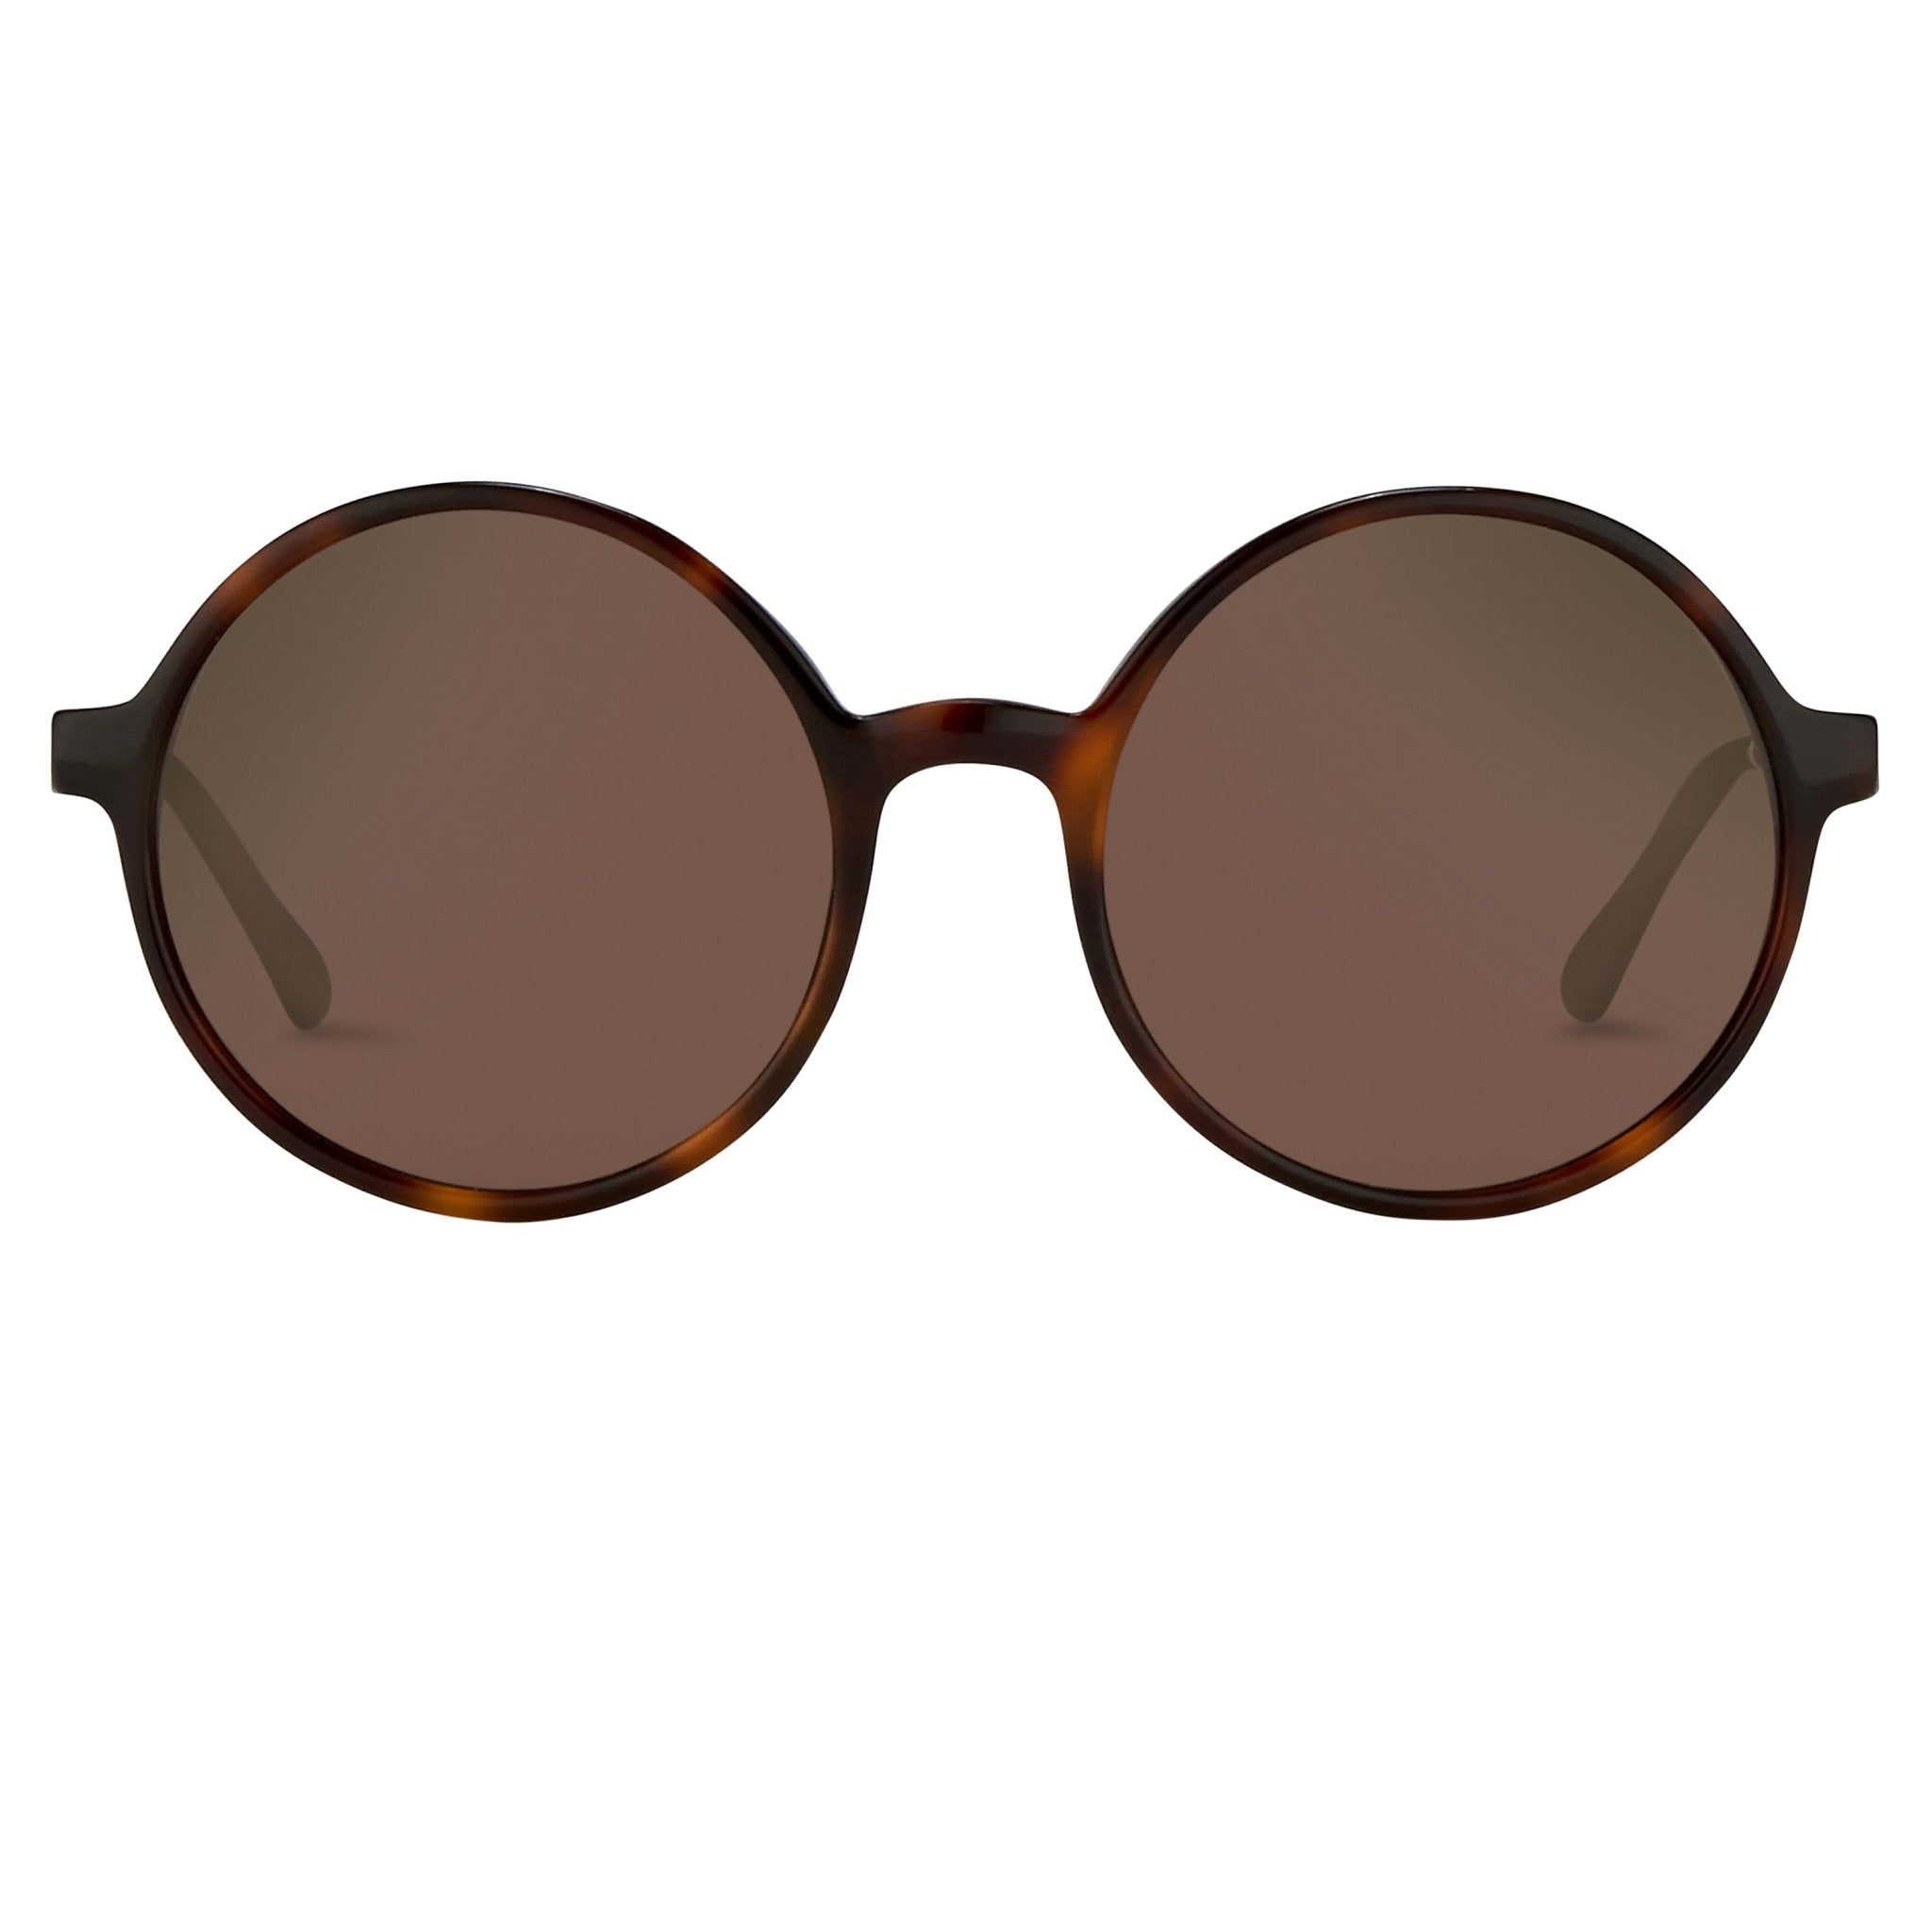 Orlebar Brown Sunglasses Round Tortoise Shell with Brown Lenses OB27C2SUN - Watches & Crystals